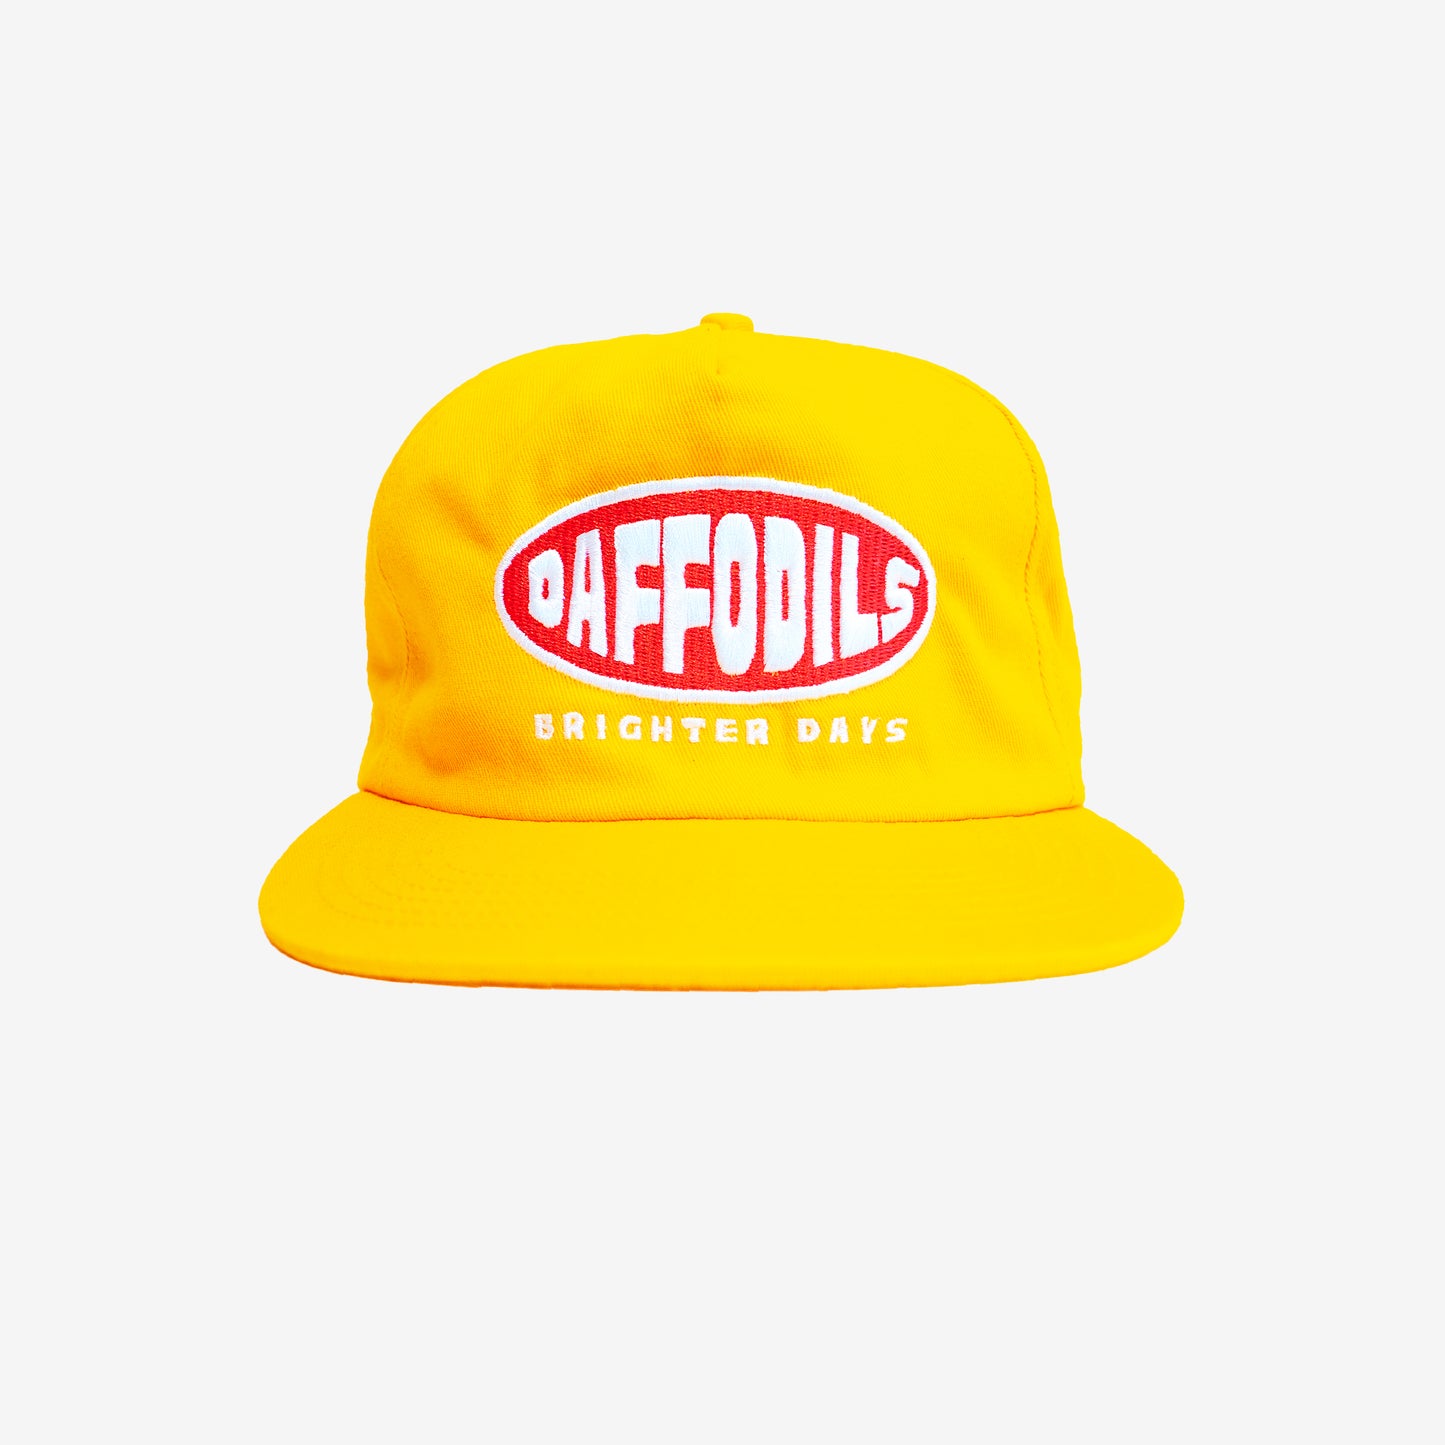 The Daffodils "Brighter Days" Hat